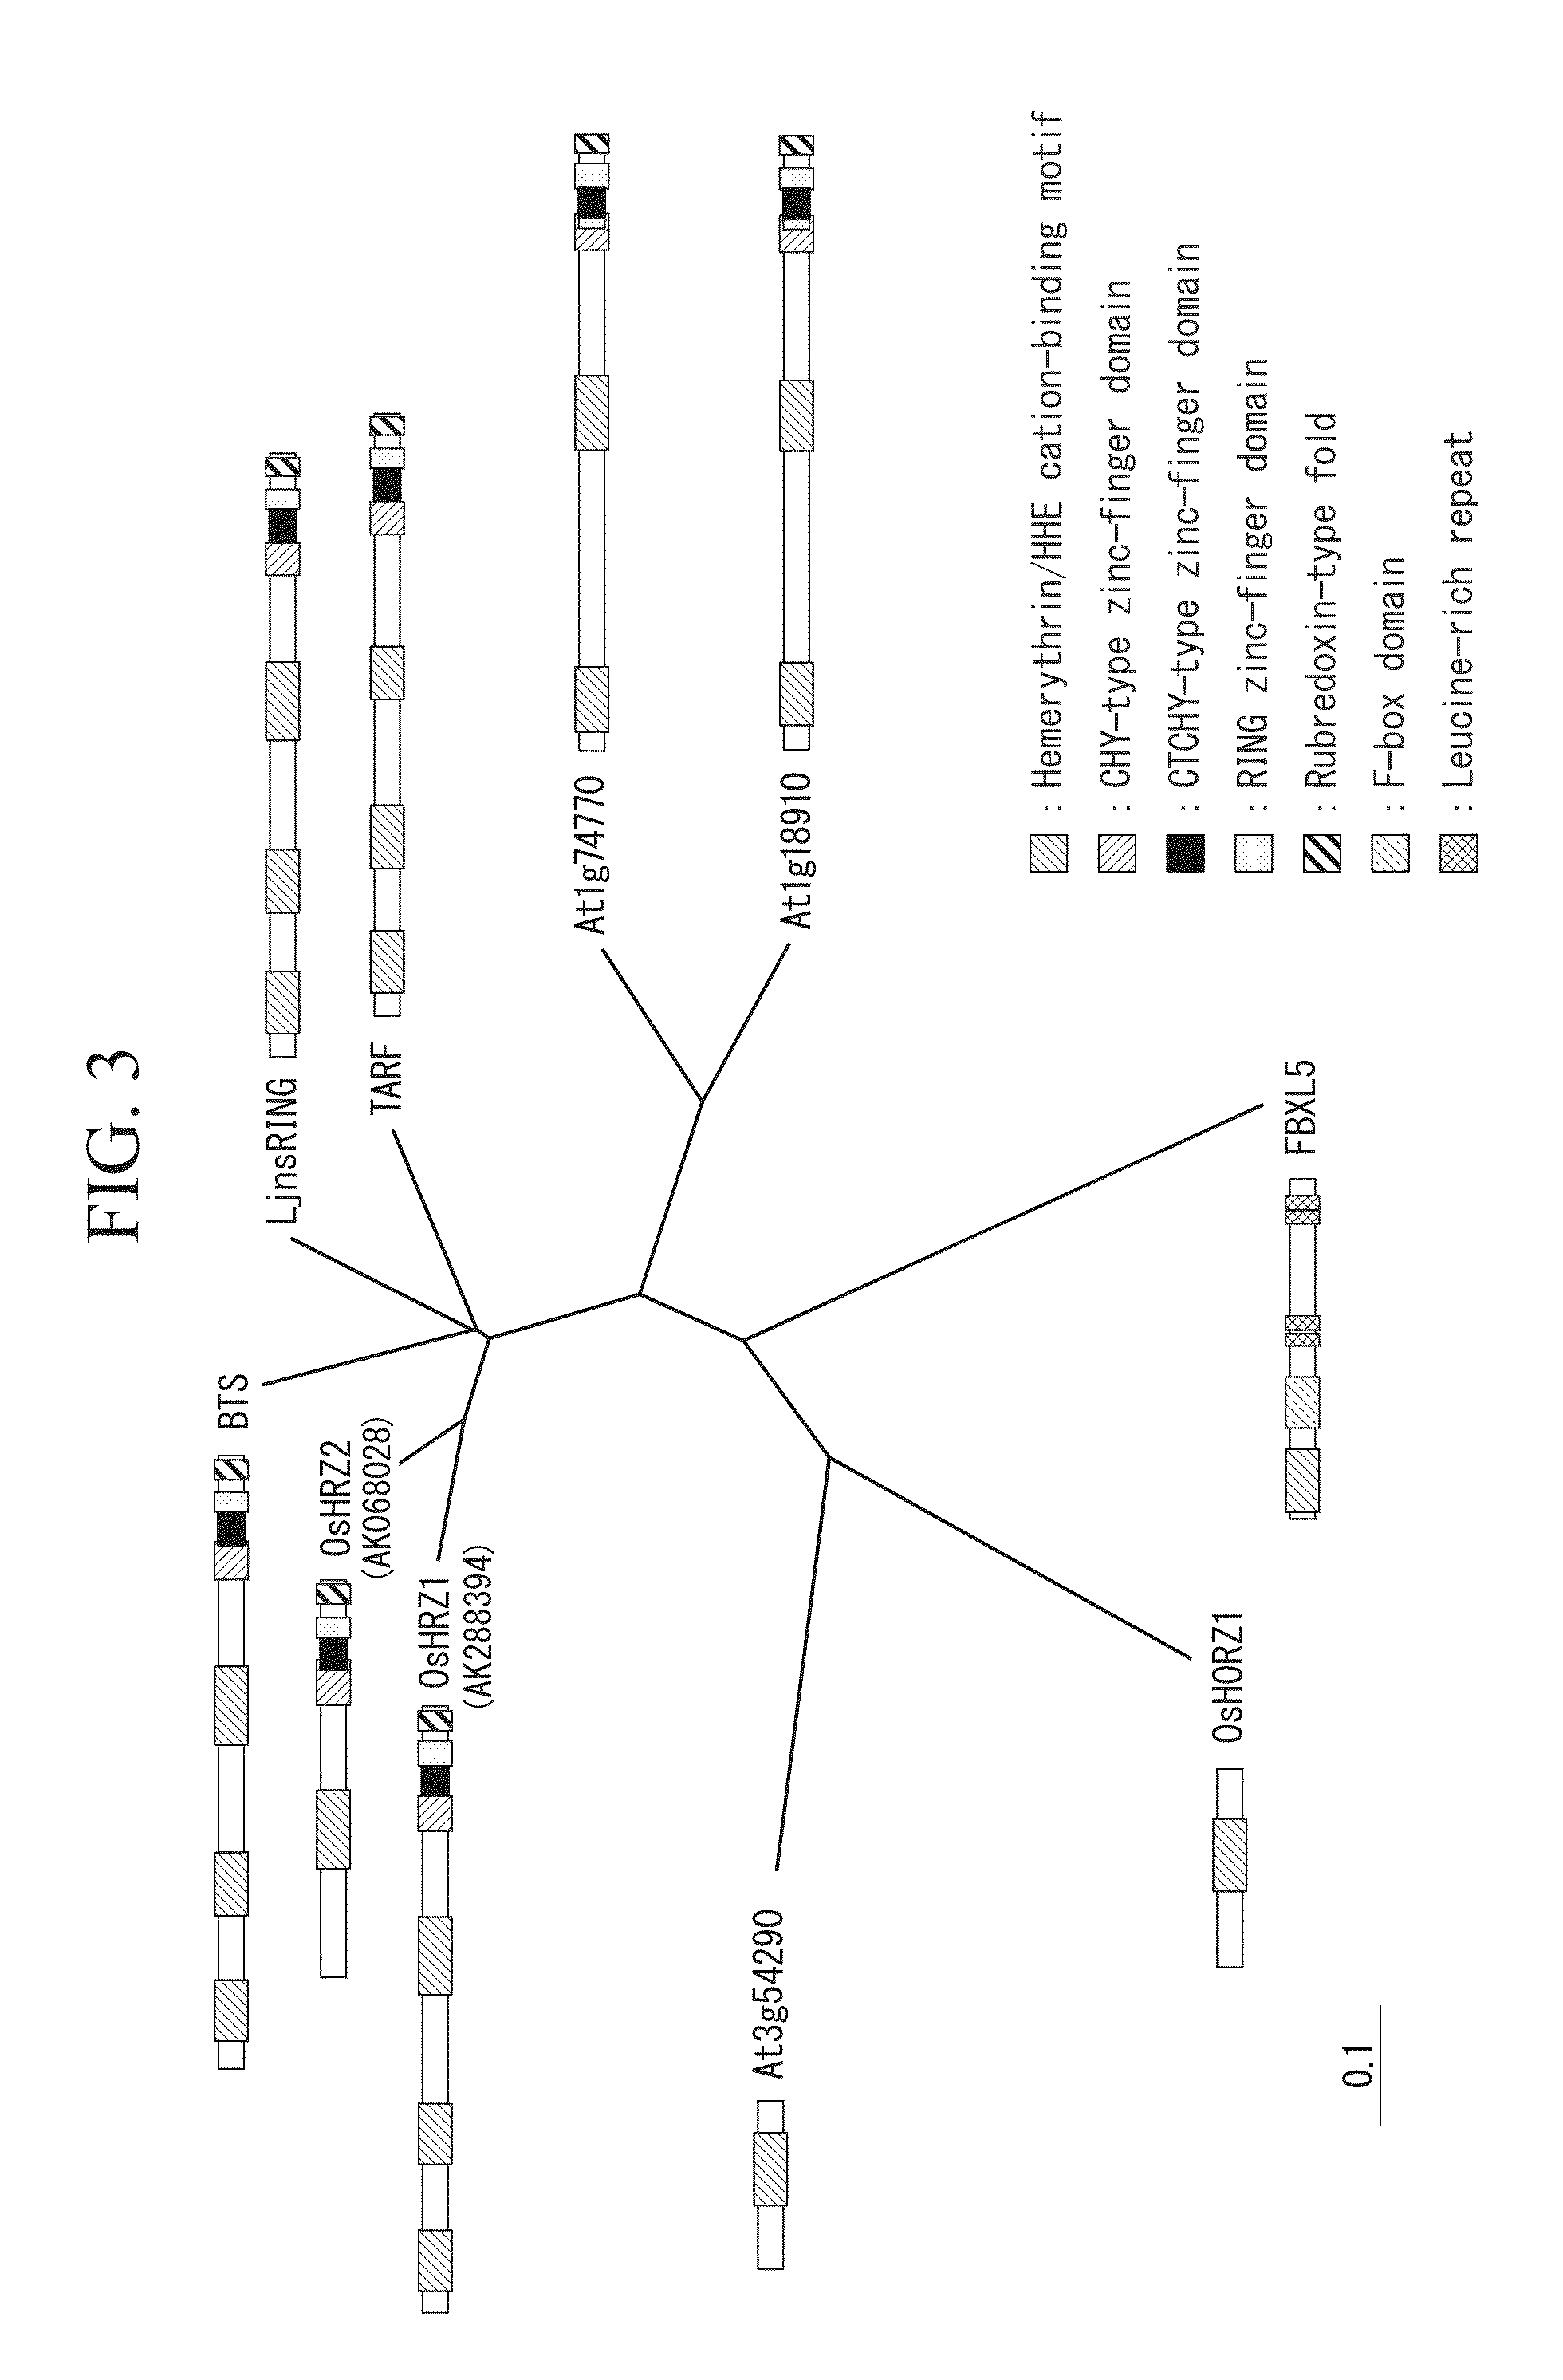 Iron-zinc binding control factor, and technique for improving iron deficiency tolerance of plant and enhancing iron and zinc accumulation in edible part thereof by controlling expression of novel iron-zinc binding control factor